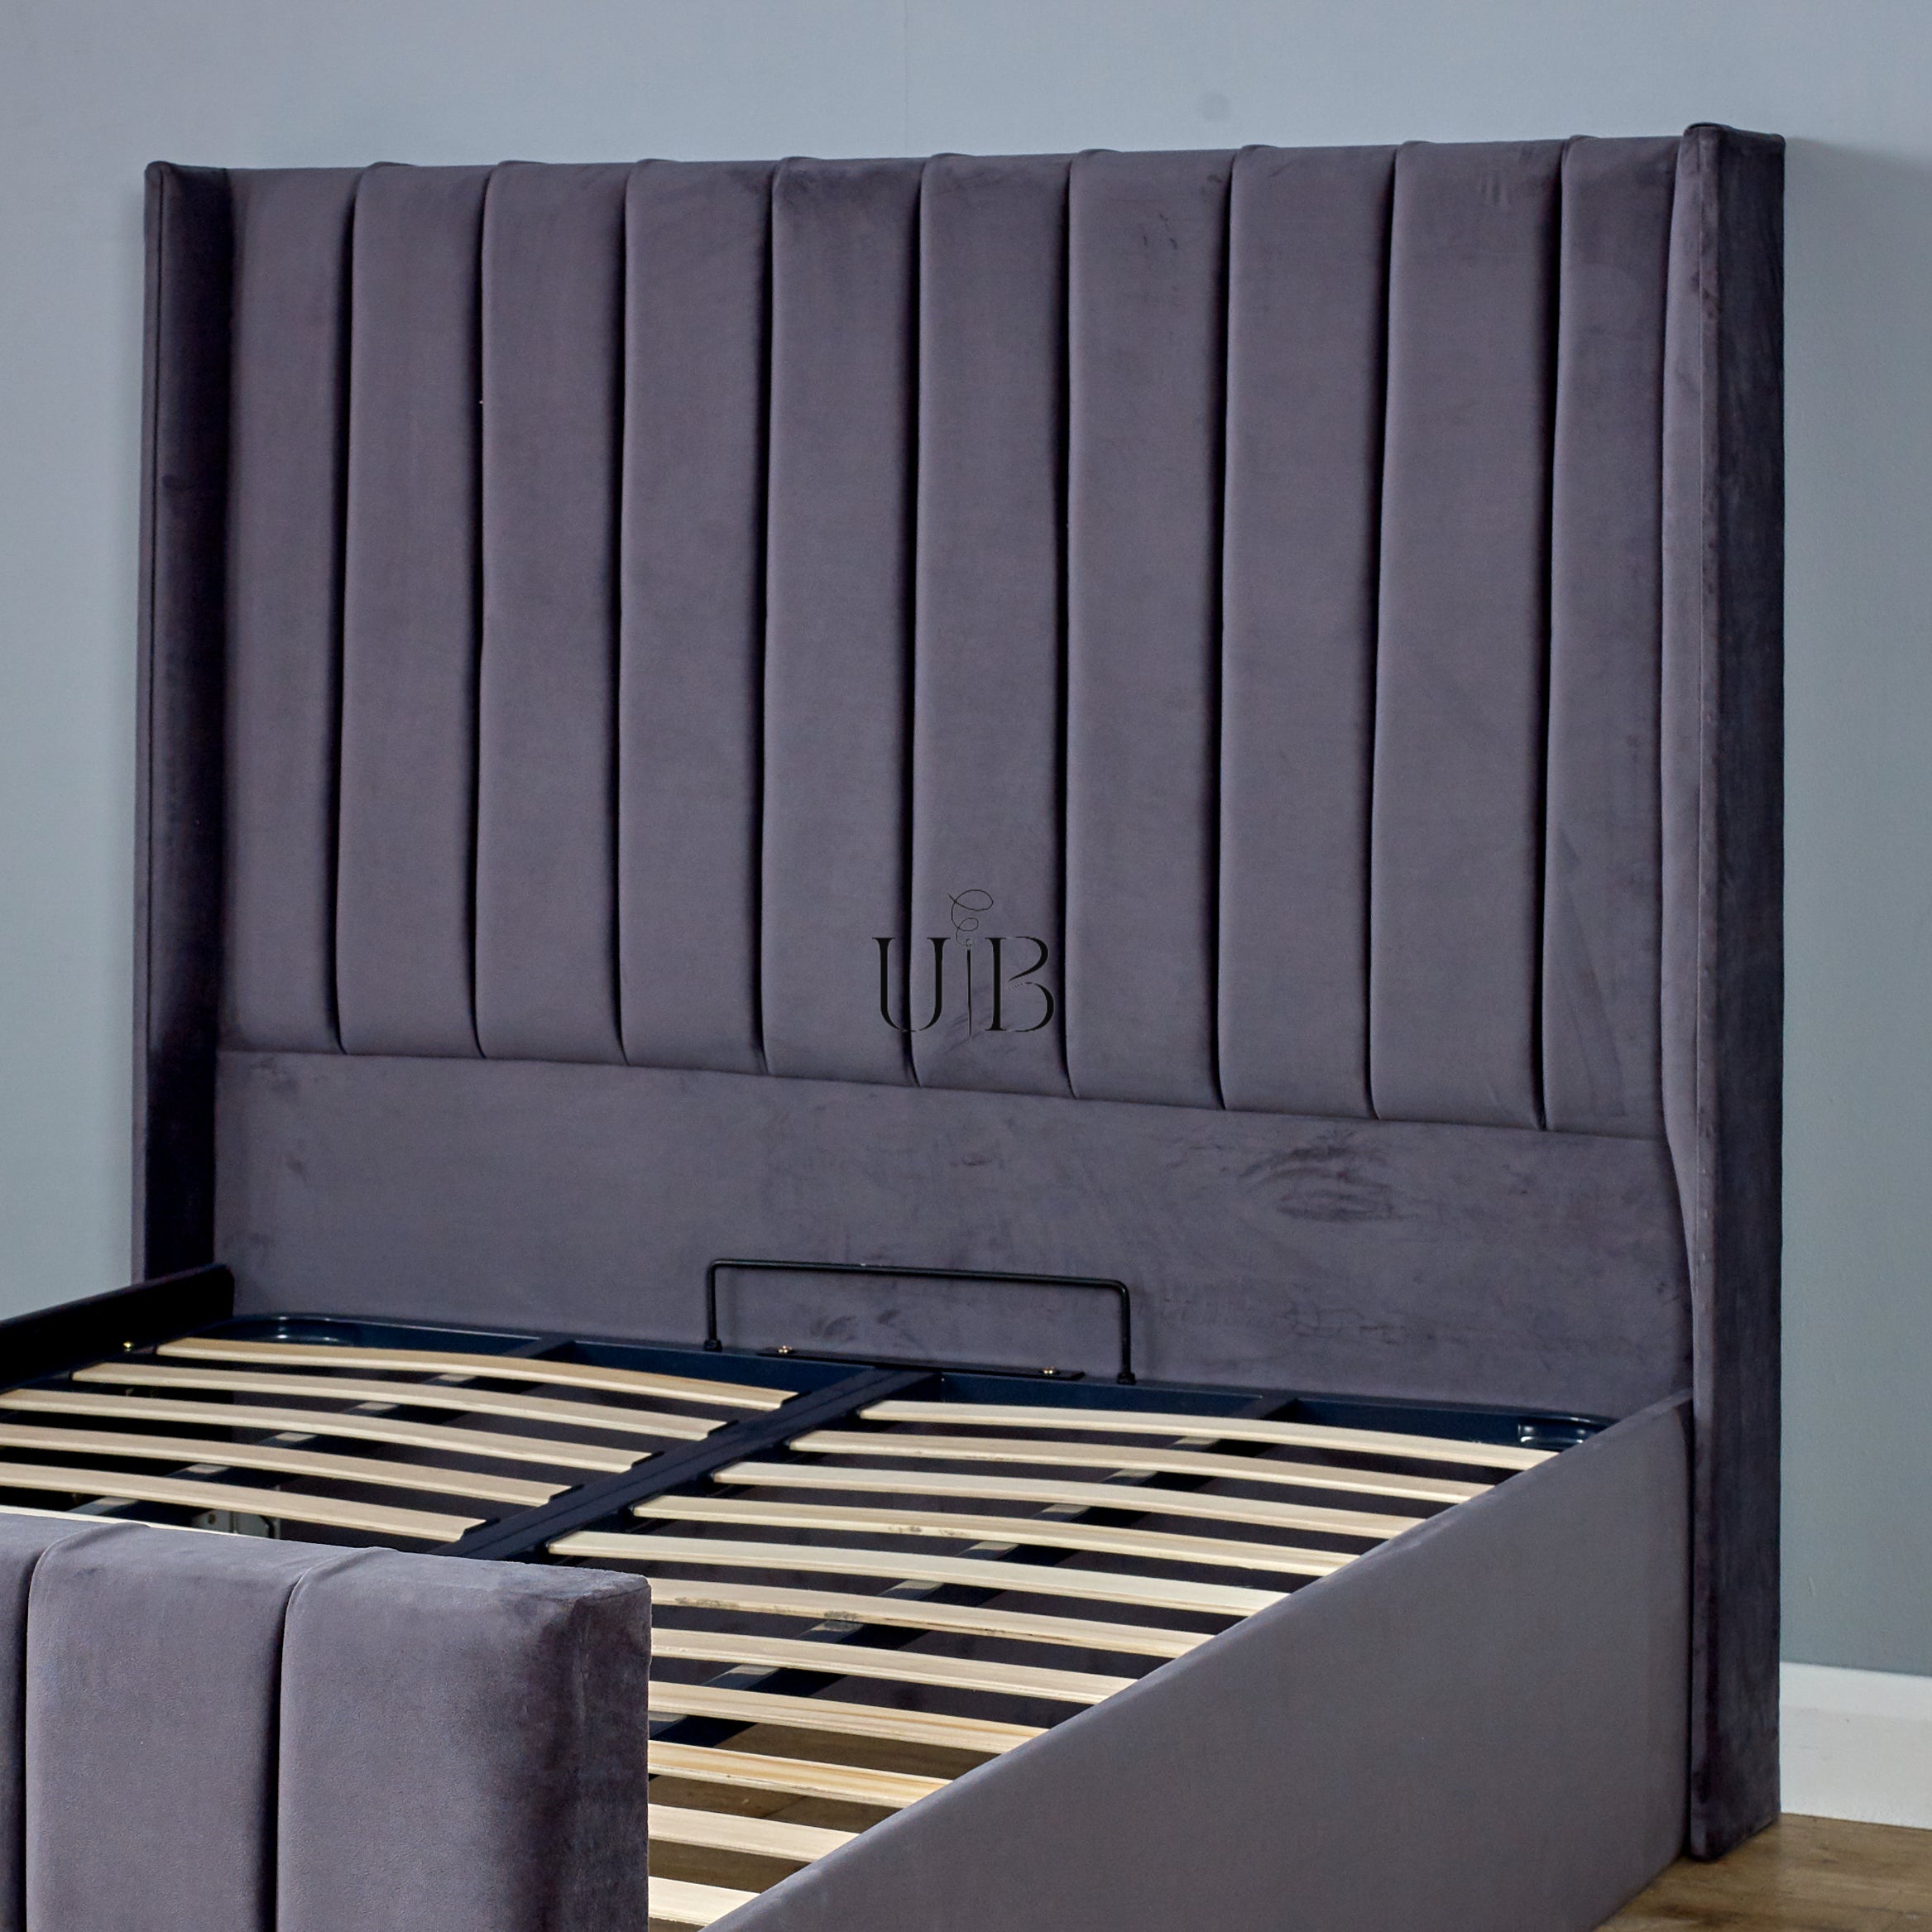 Zenith Wingback Ottoman Bed